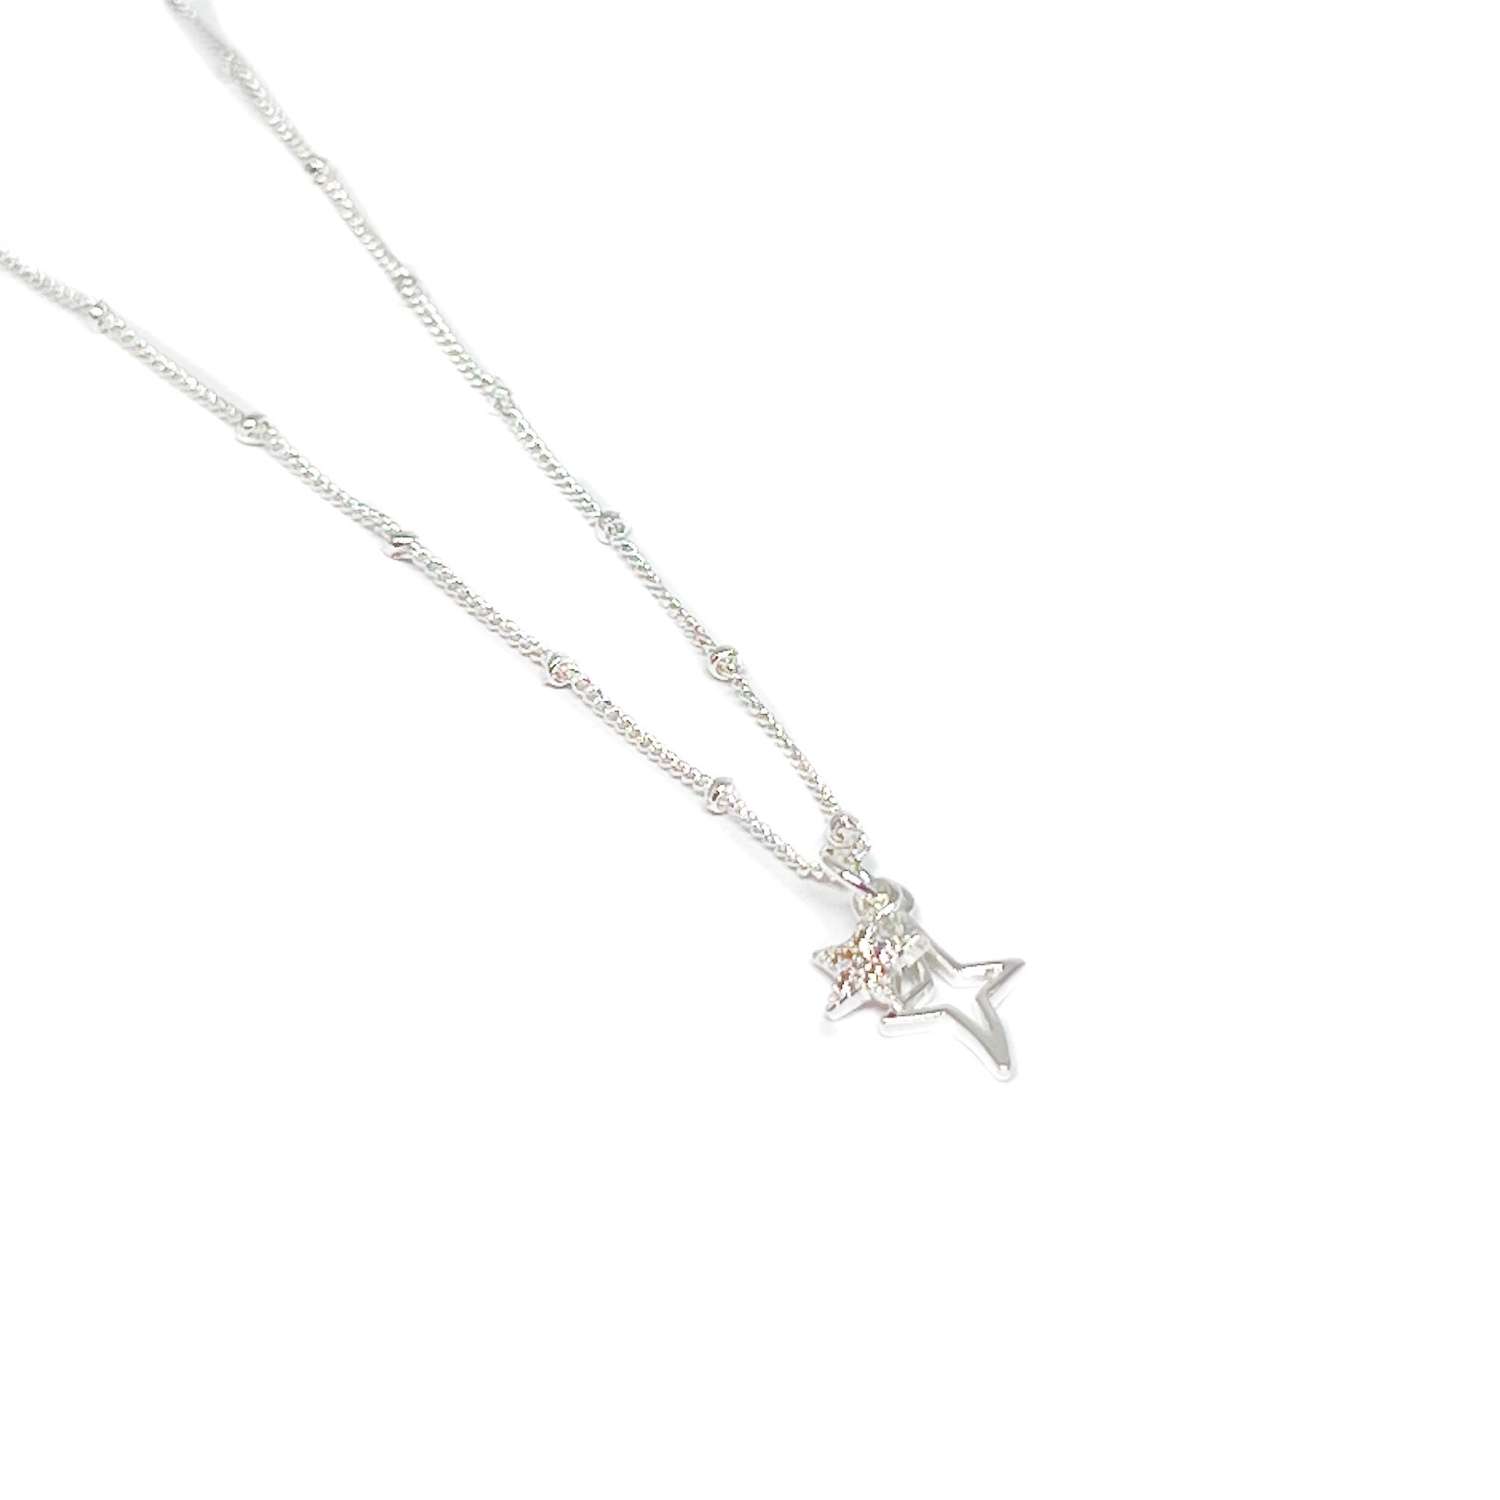 Astra Star Necklace - Silver